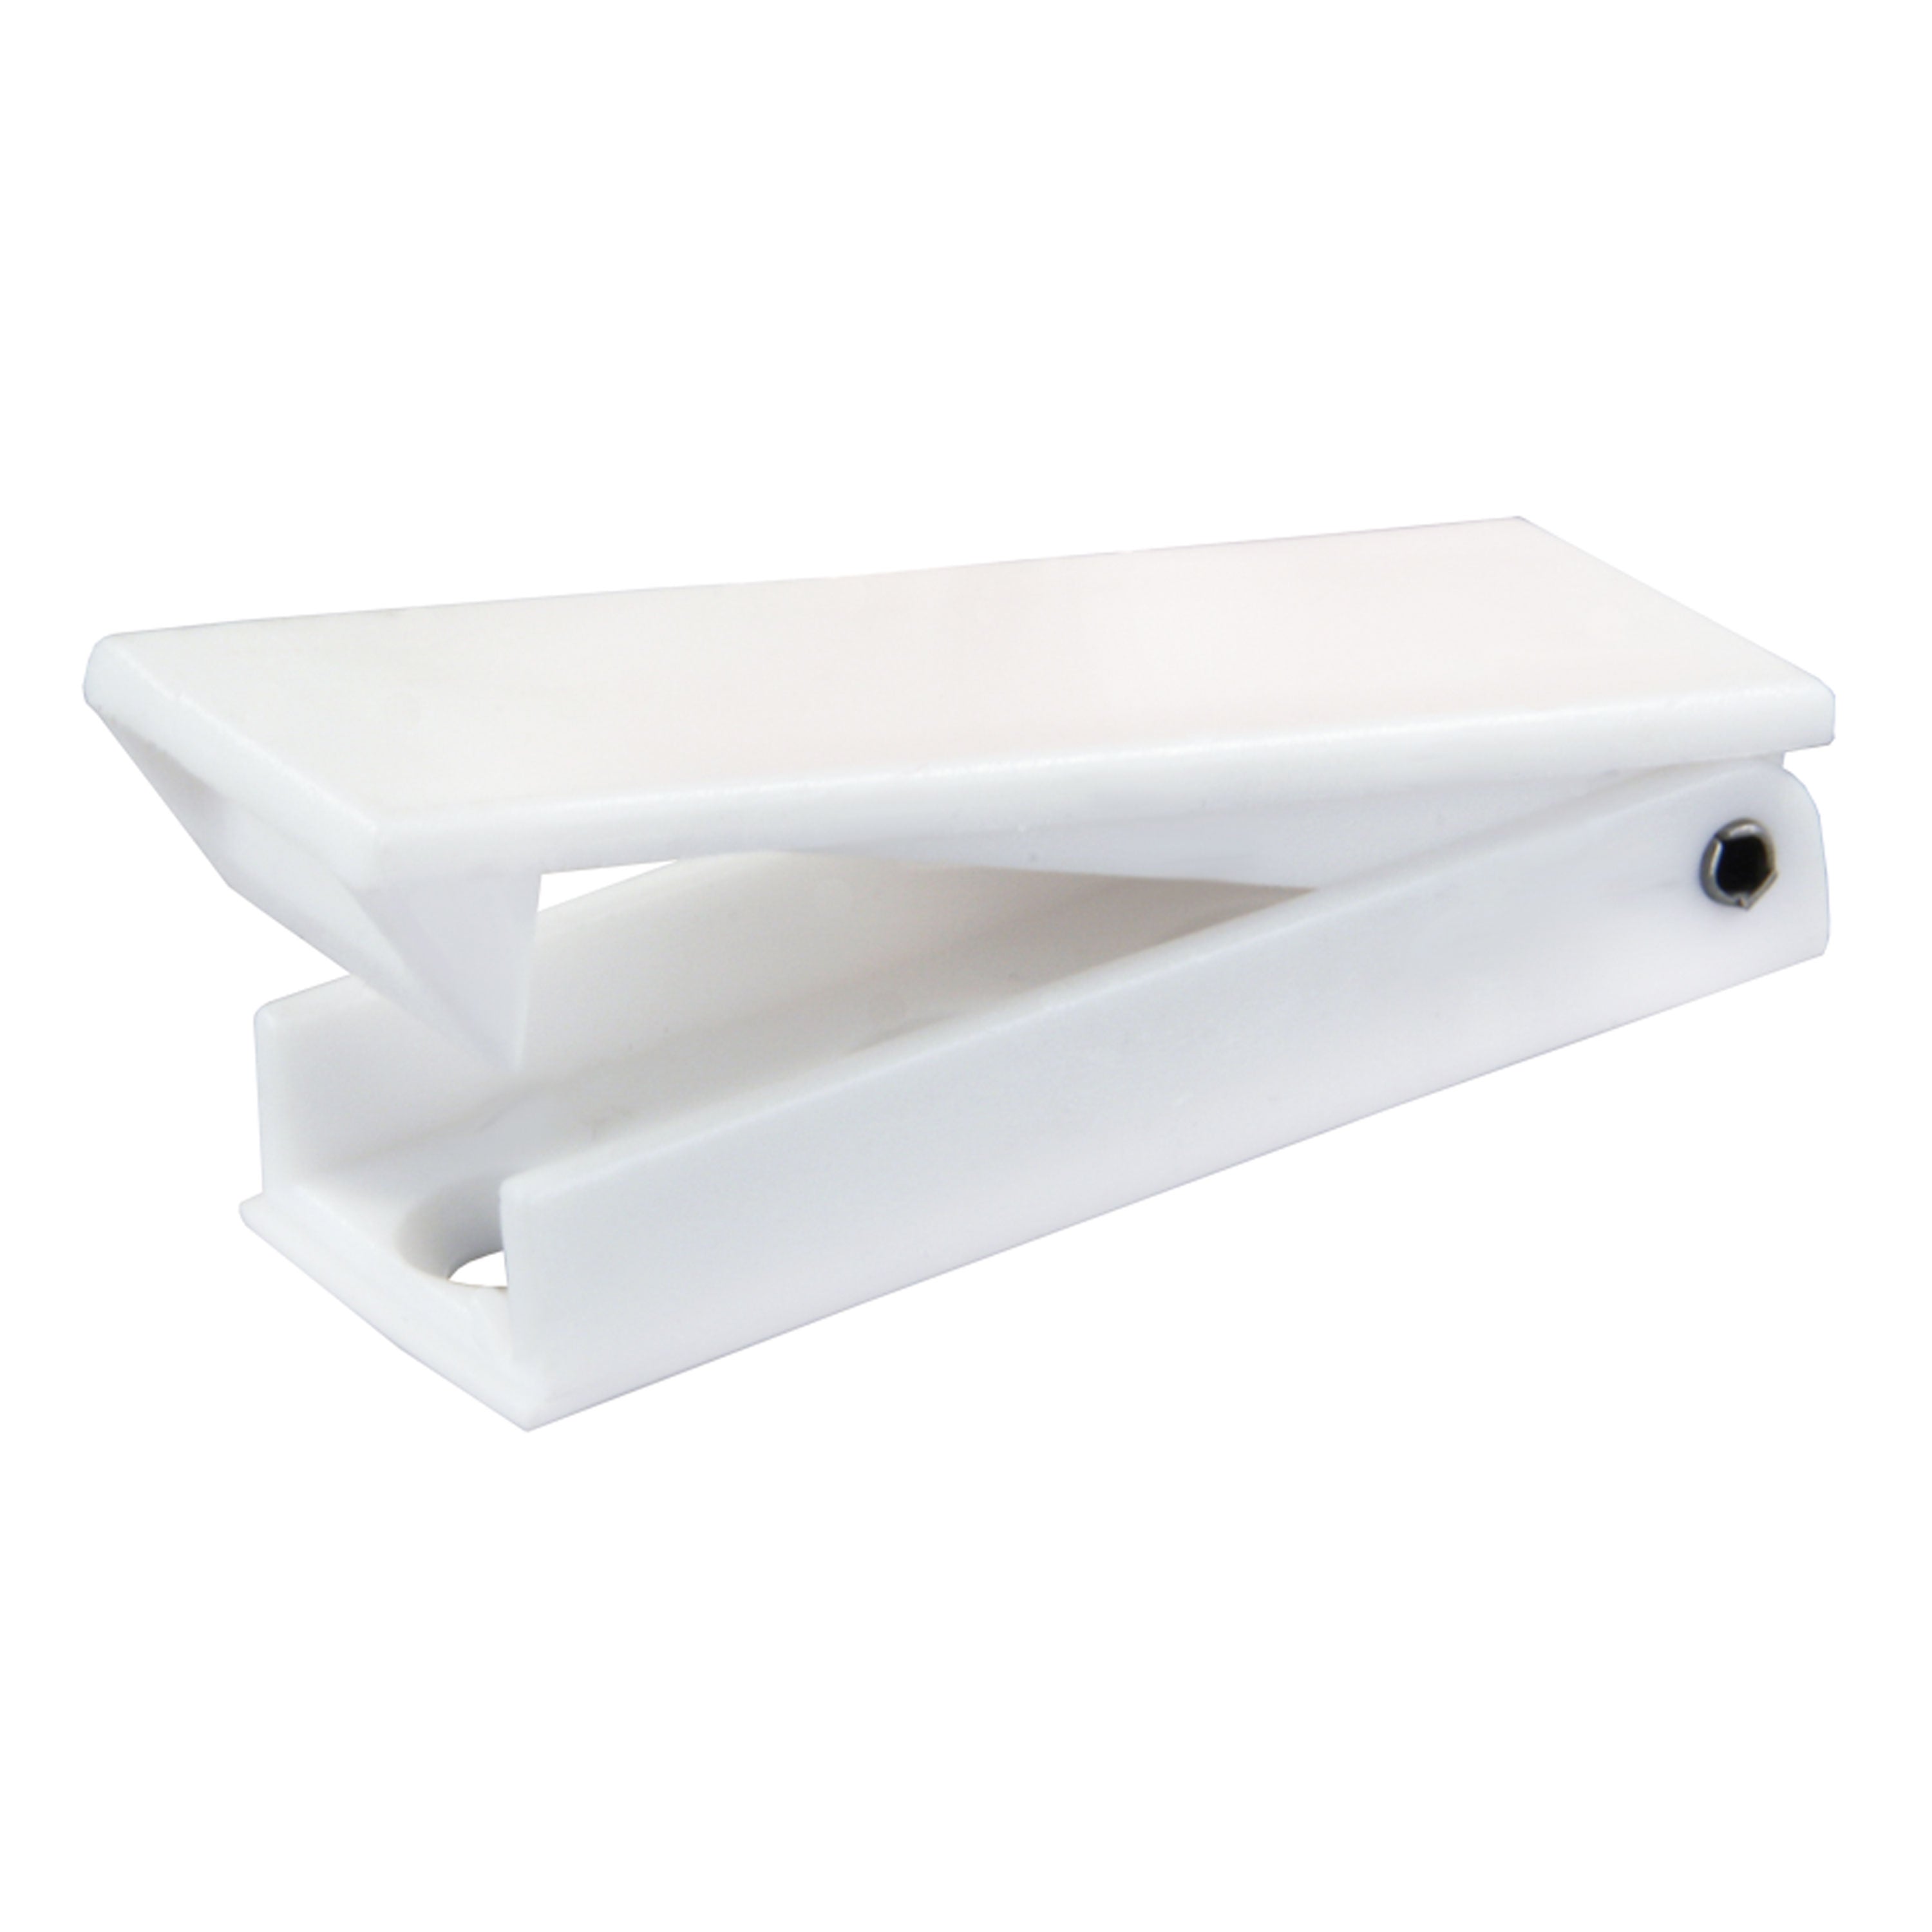 JR Products 10355 Squared Baggage Door Catch - White, Pack of 2